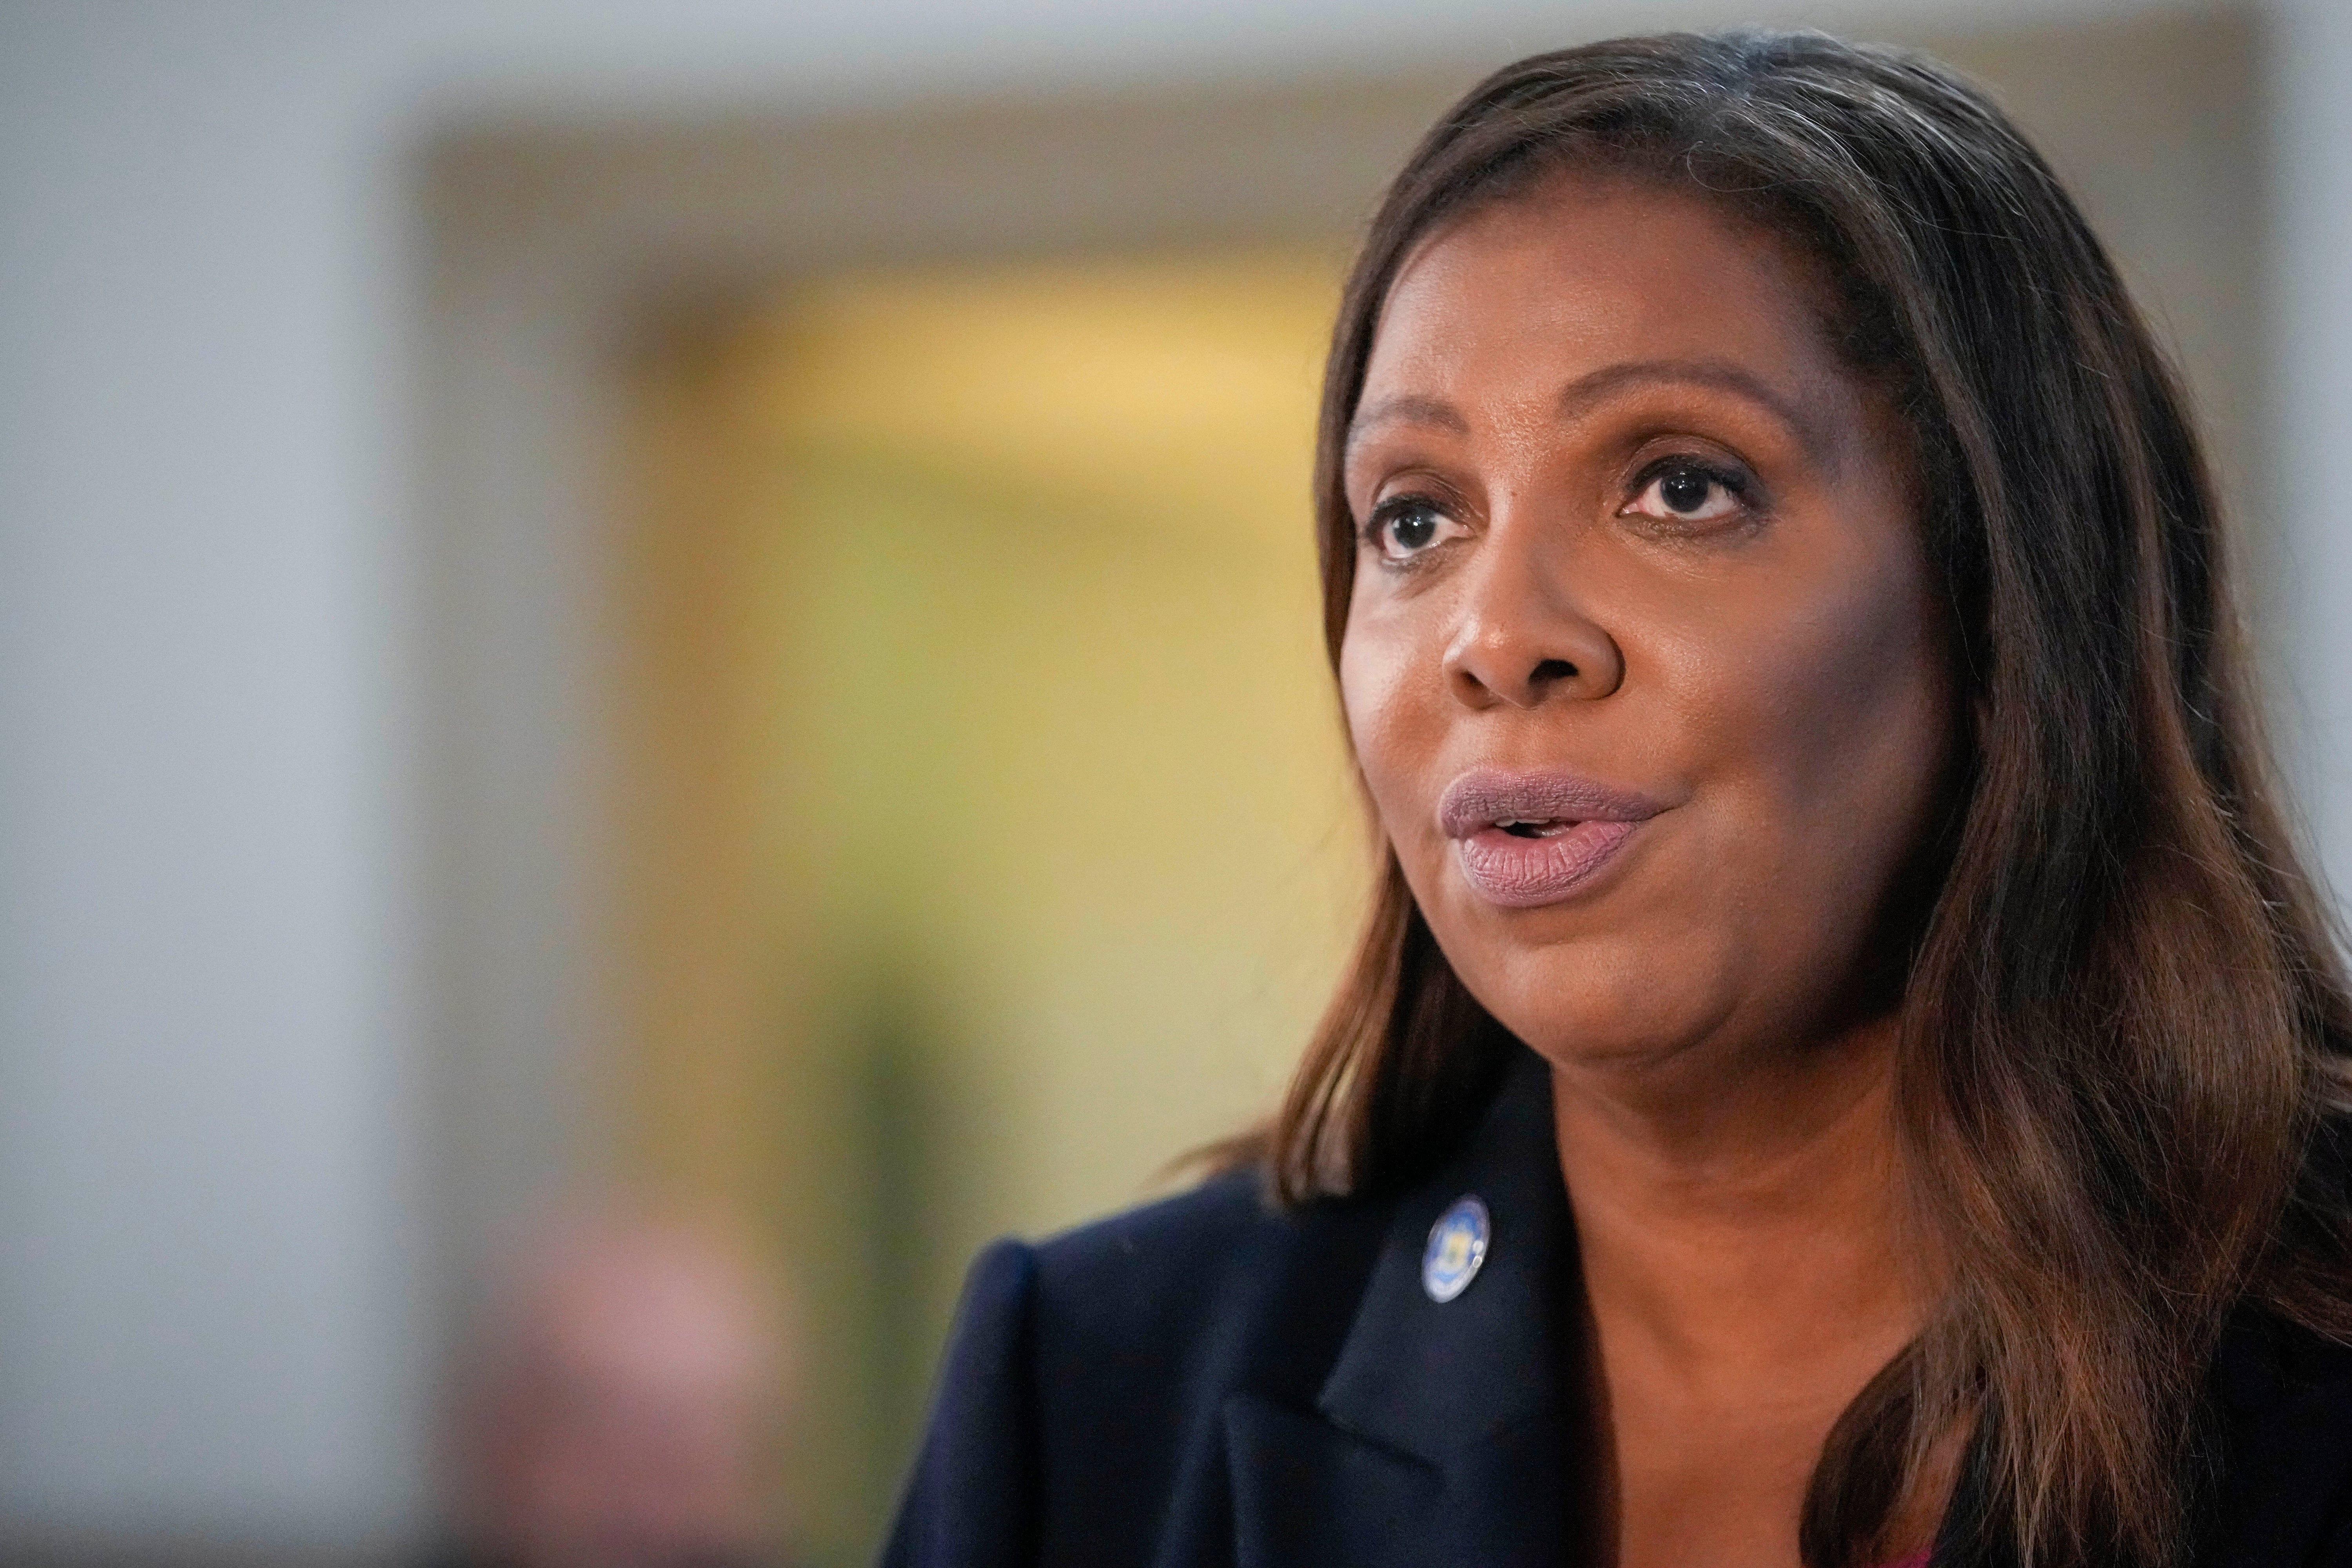 New York Attorney General Letitia James speaks to reporters on 4 October during a break in a trial stemming from her lawsuit against Donald Trump and his business empire.